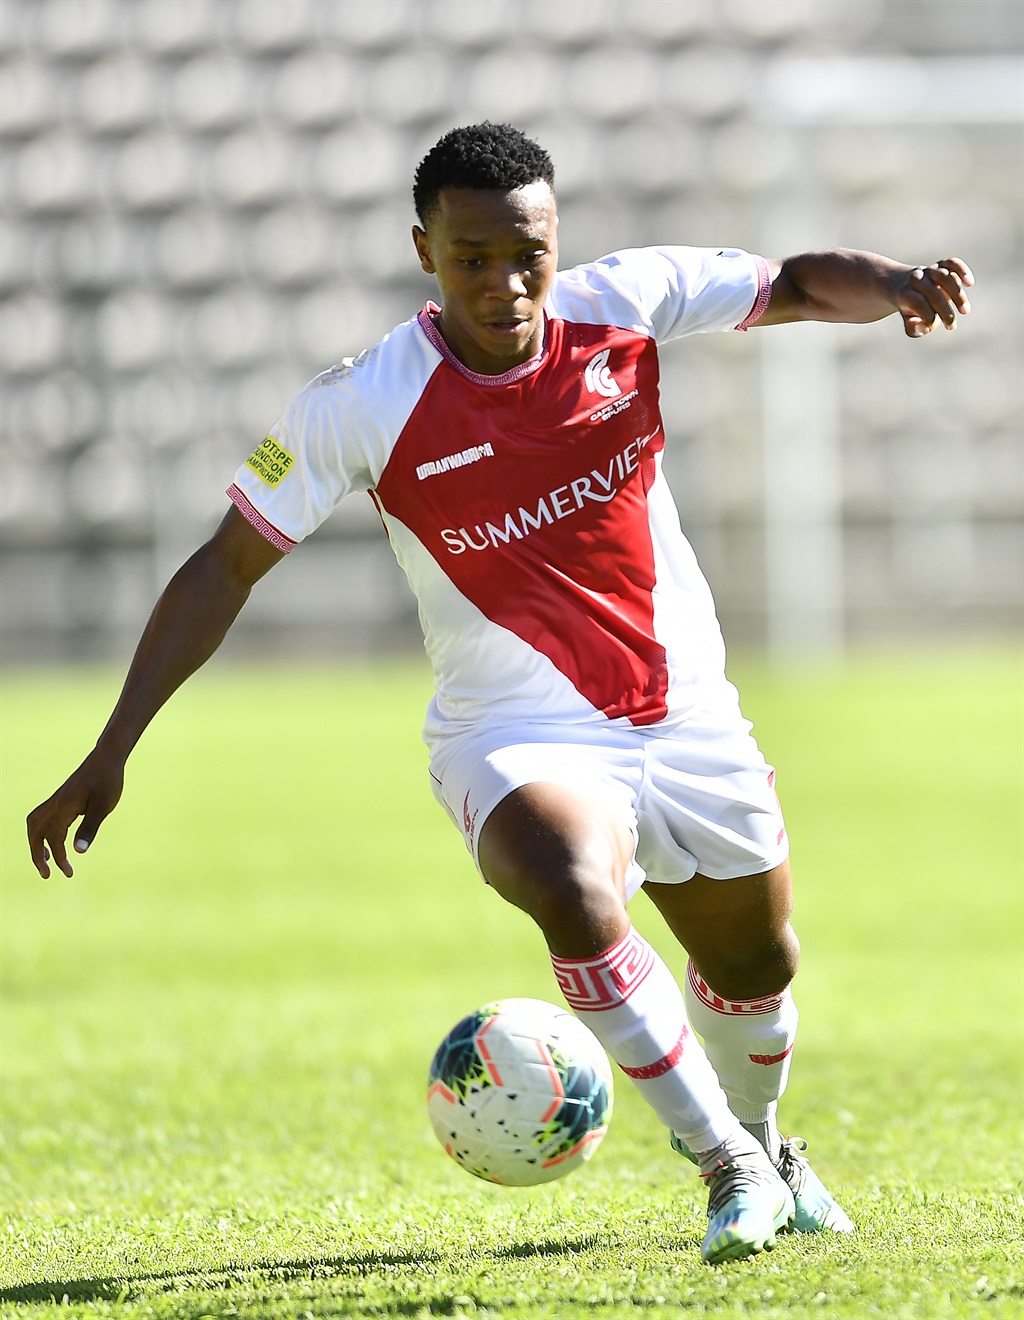 CAPE TOWN, SOUTH AFRICA - JANUARY 13: Boitumelo Radiopane of Cape Town Spurs during the Motsepe Foundation Championship match between Cape Town Spurs and Hungry Lions FC at Athlone Stadium on January 13, 2023 in Cape Town, South Africa. (Photo by Ashley Vlotman/Gallo Images)